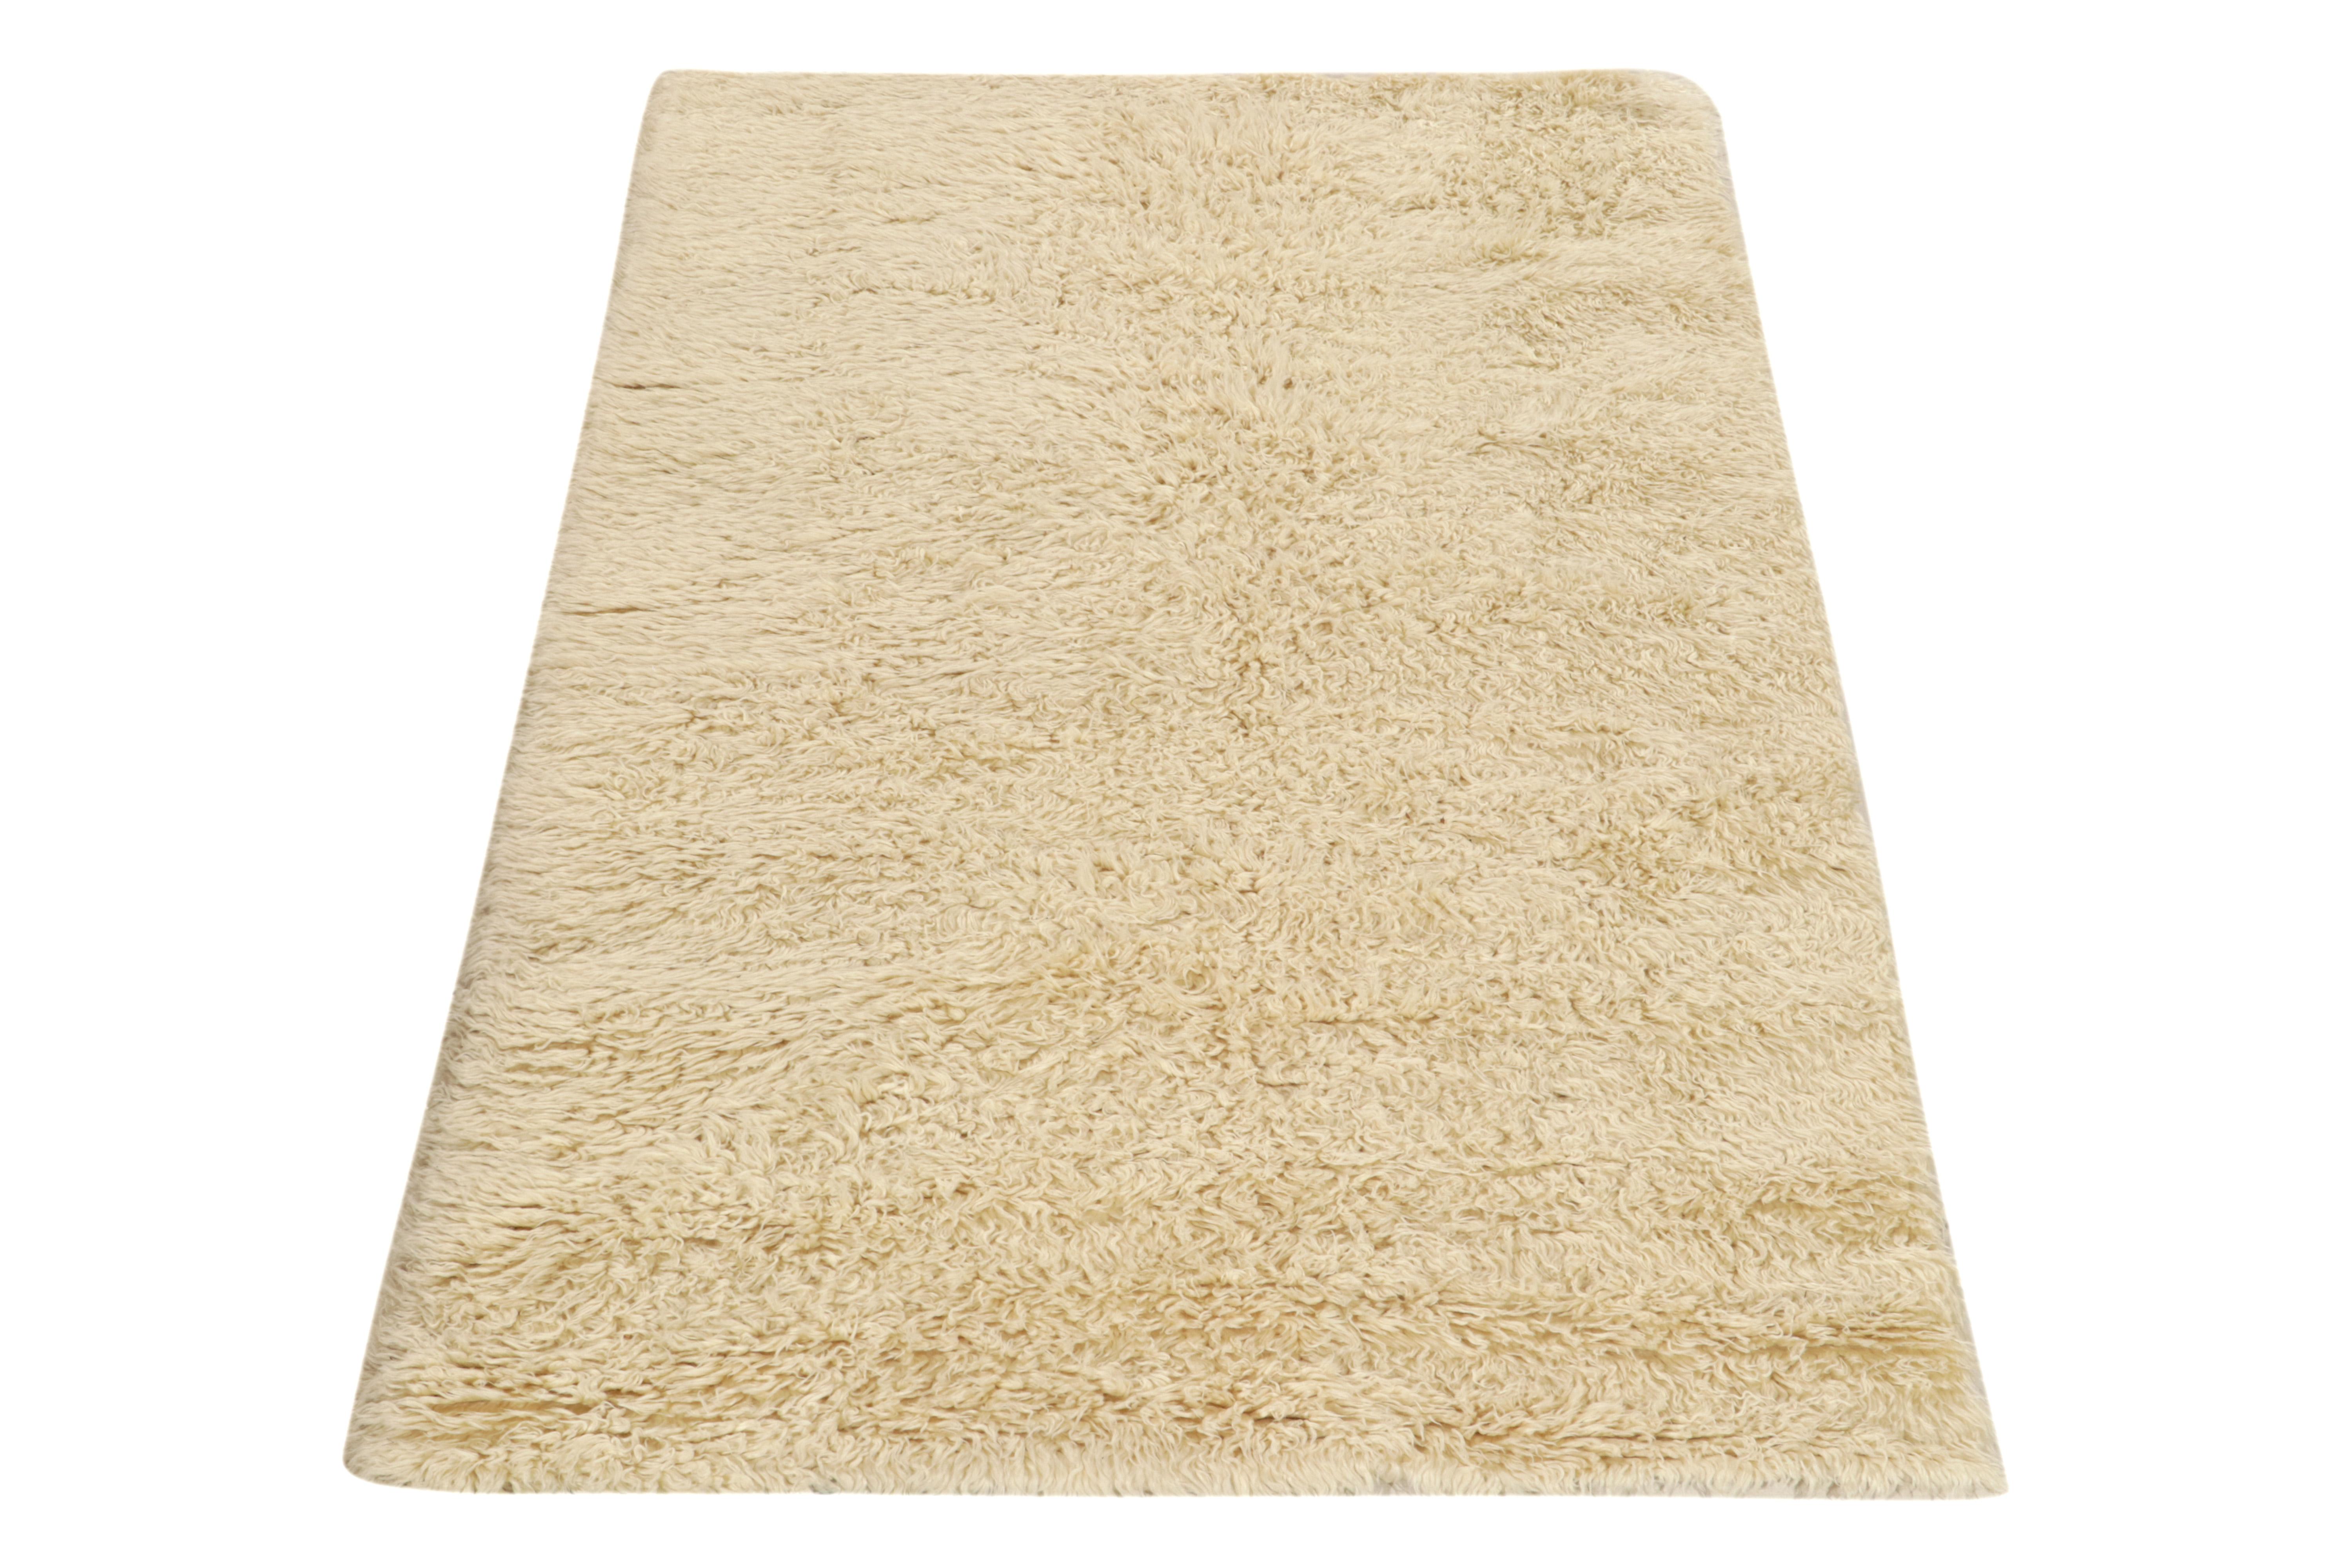 From Rug & Kilim’s modern collections, this 4x6 piece is an ode to Moroccan rug style and craftsmanship. Hand-knotted in wool, this contemporary piece revels in an alluring off-white and beige shag pile connoting the comfort & coziness that this